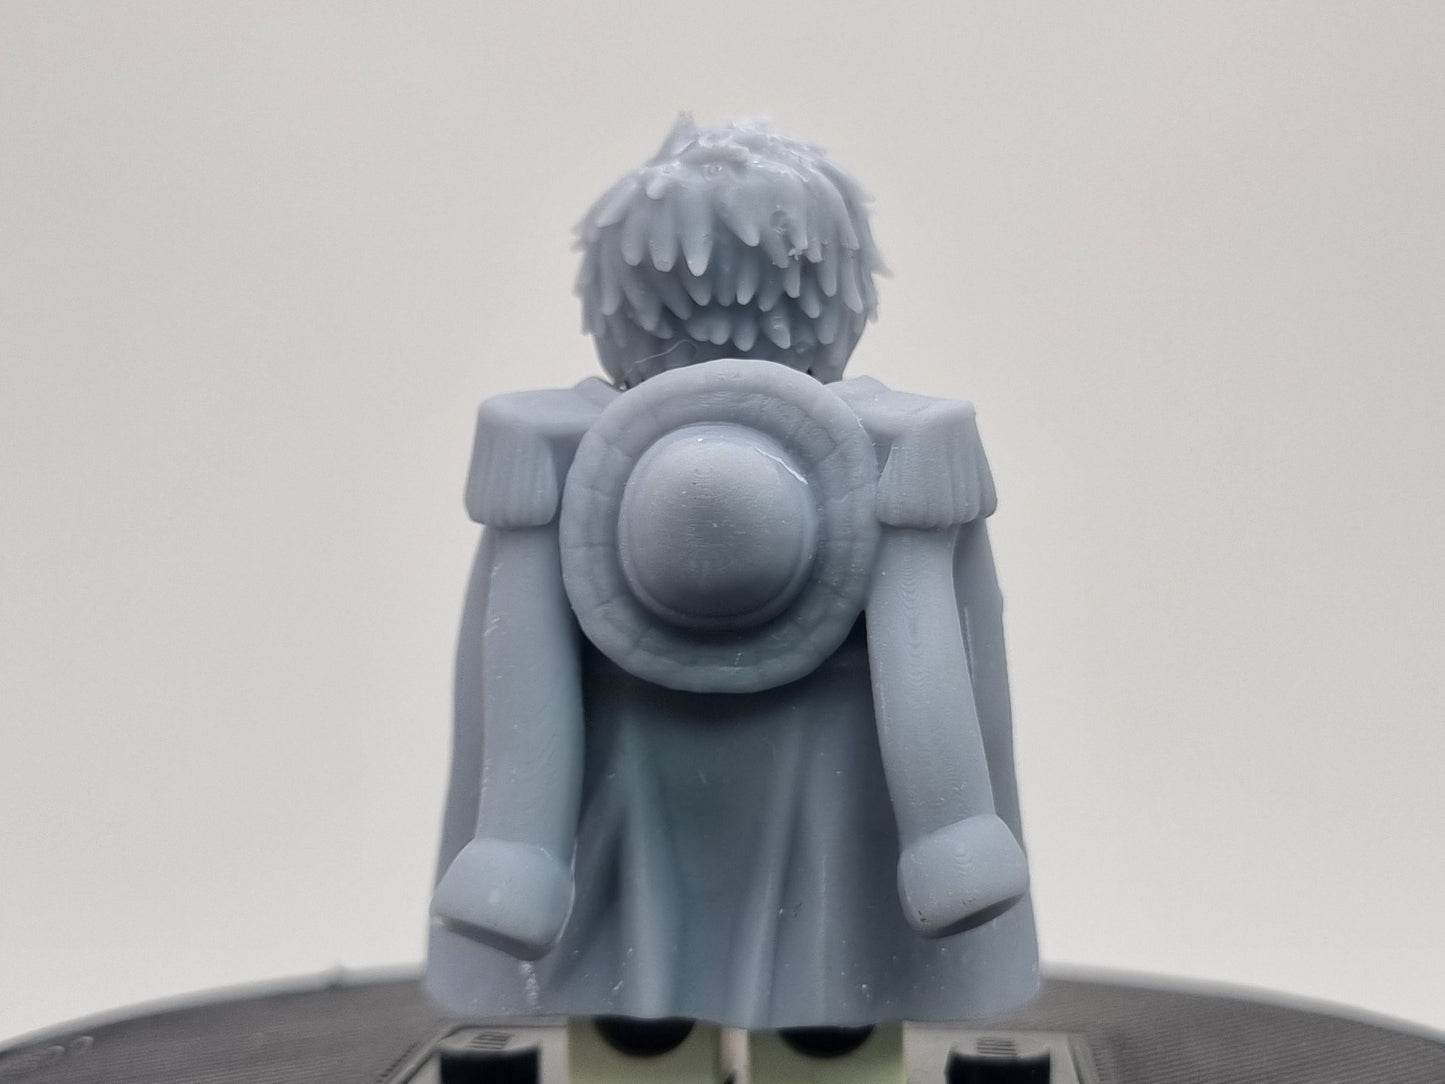 Building toy custom 3D printed rubber pirrate captain with cloak and hat off!